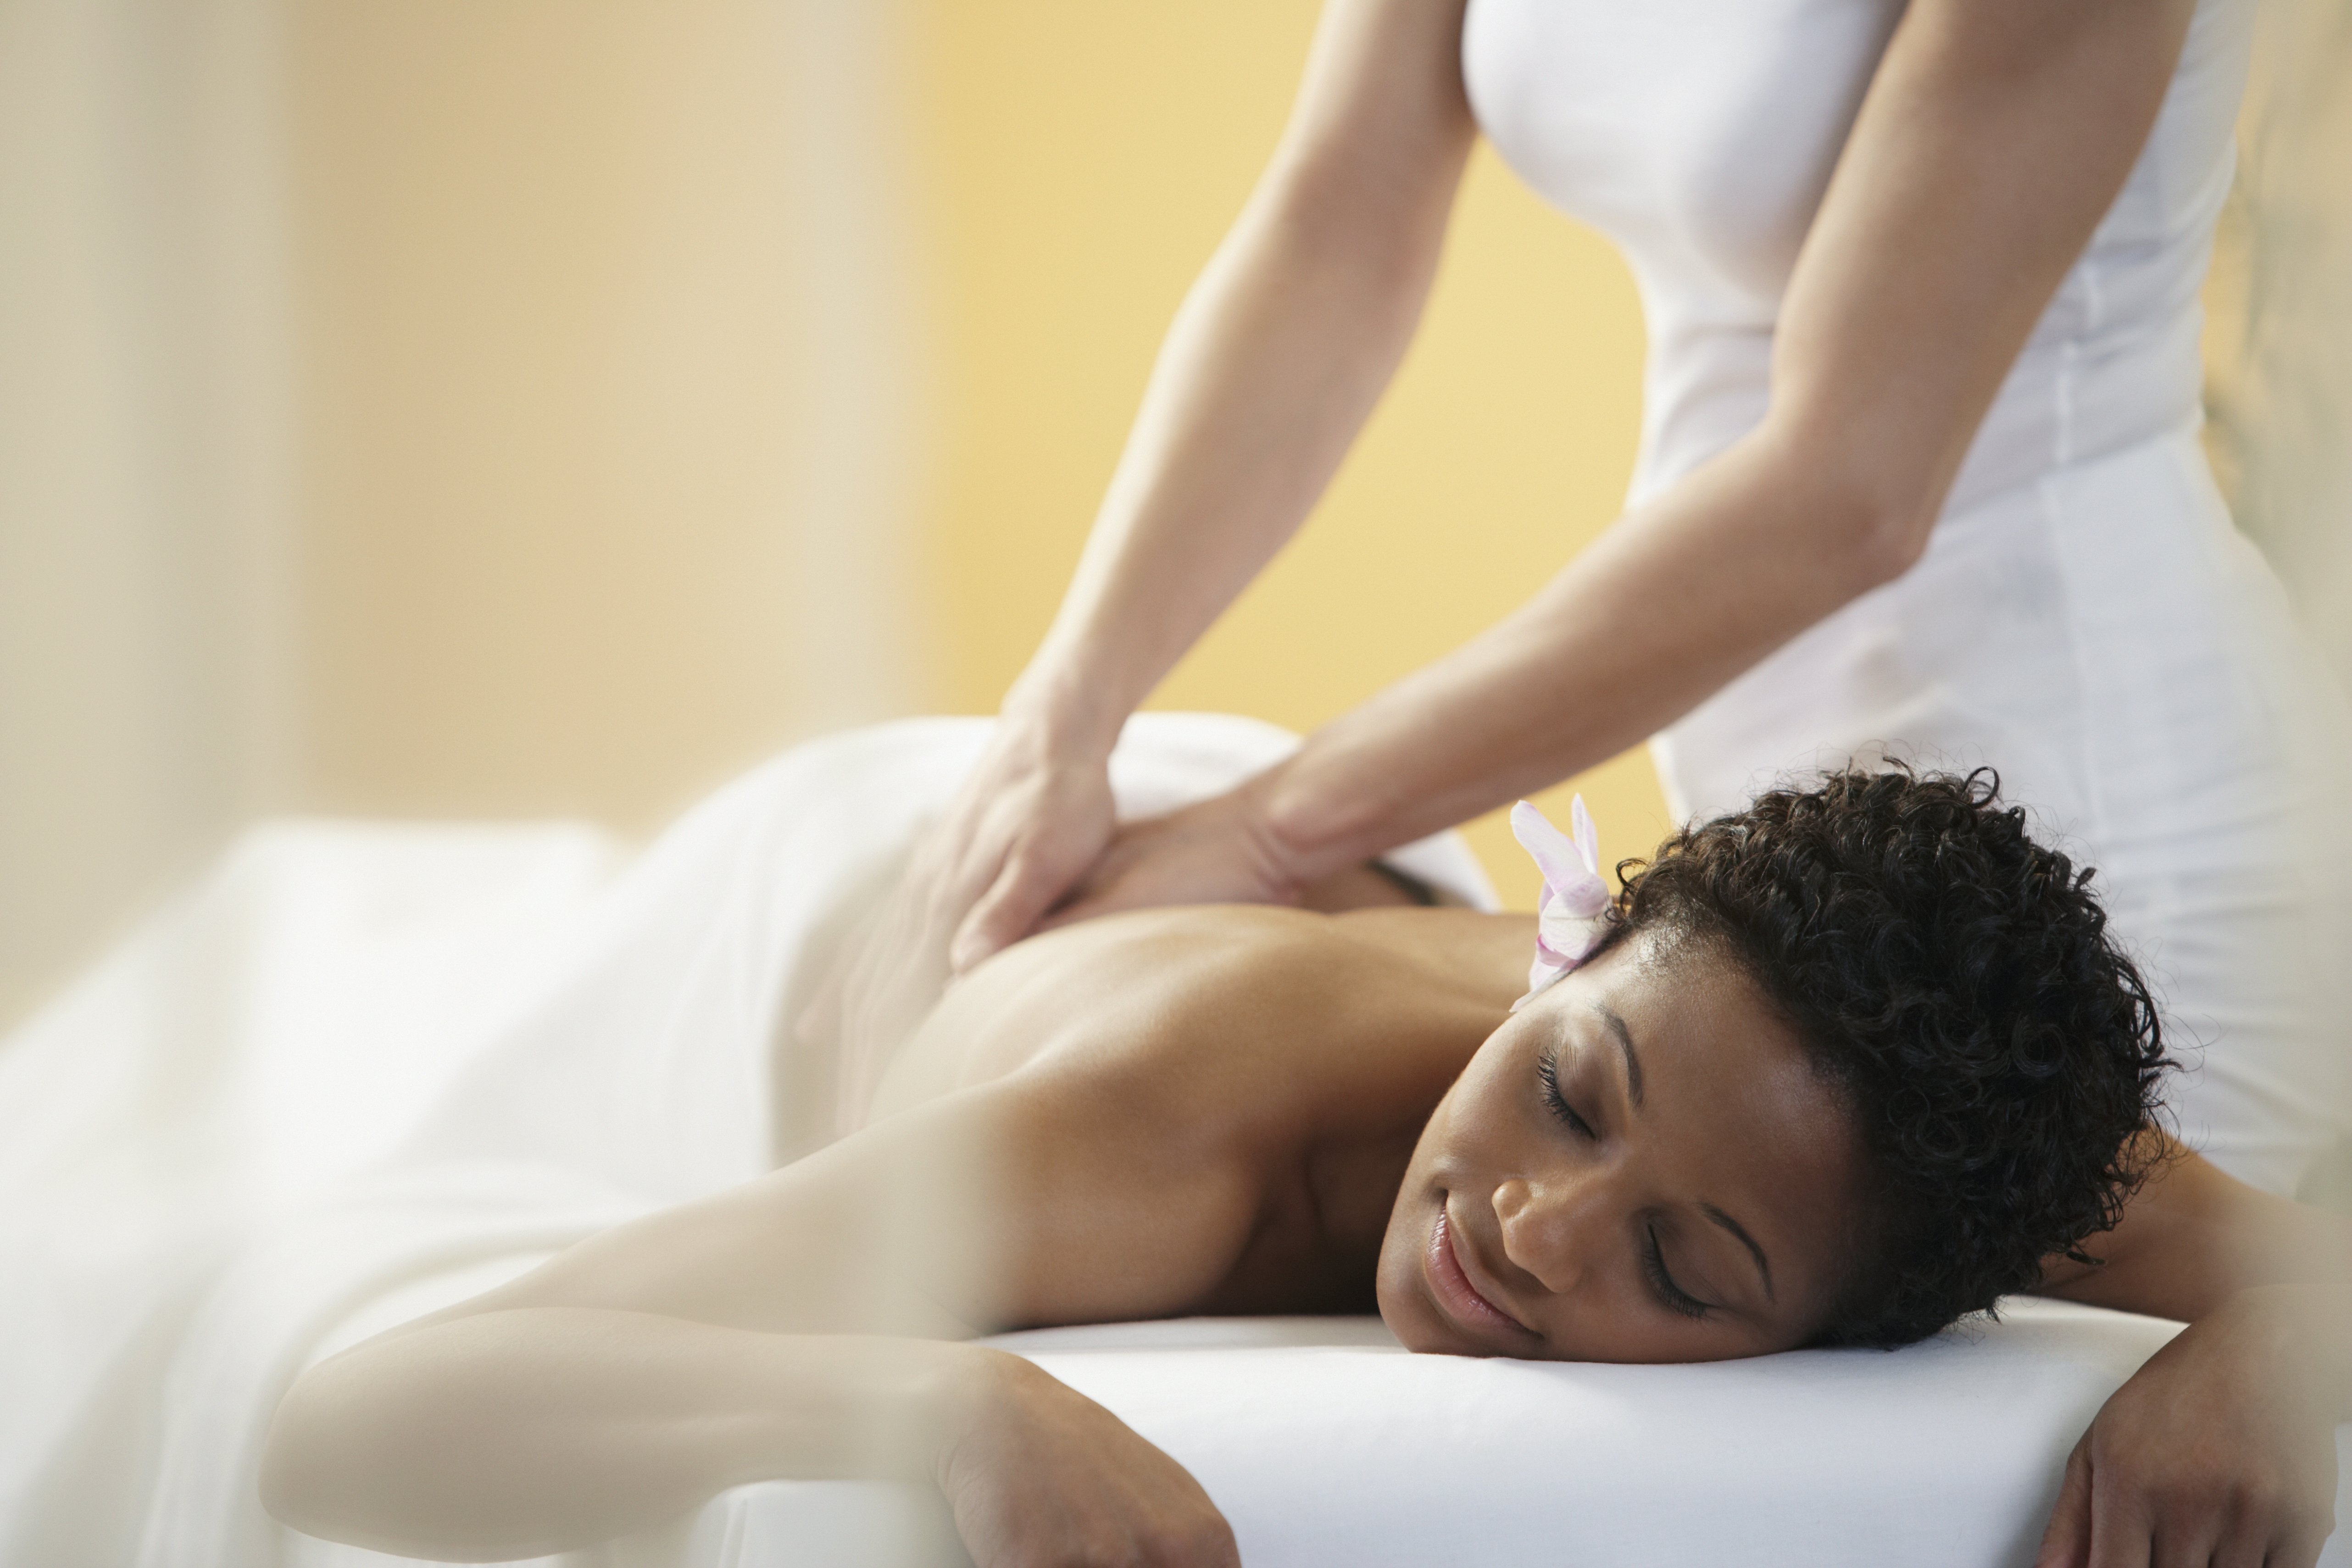 Deep tissue massage: Benefits, risks, and what to expect